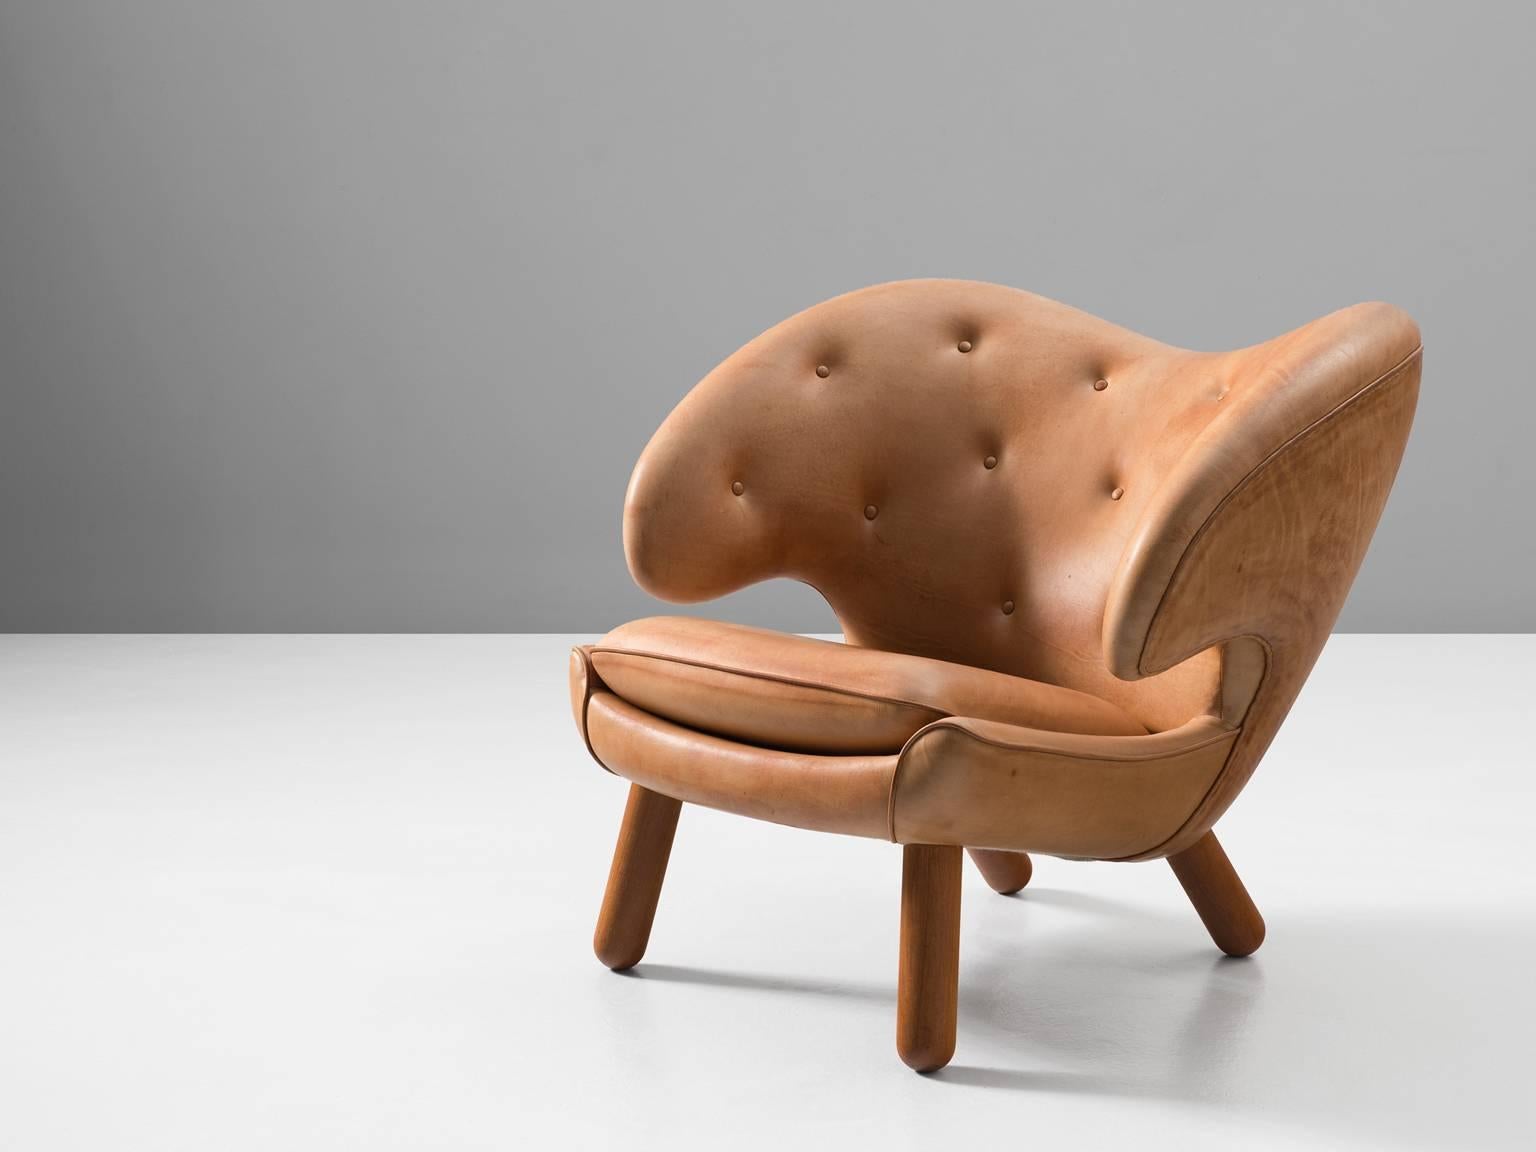 Pelican chair, in wood and leather, by Finn Juhl, Denmark, 1940. 

This chair was designed by Finn Juhl in 1940 and presented on the annual Copenhagen cabinetmakers guild exhibition. As almost all his furniture, the early editions of this chair